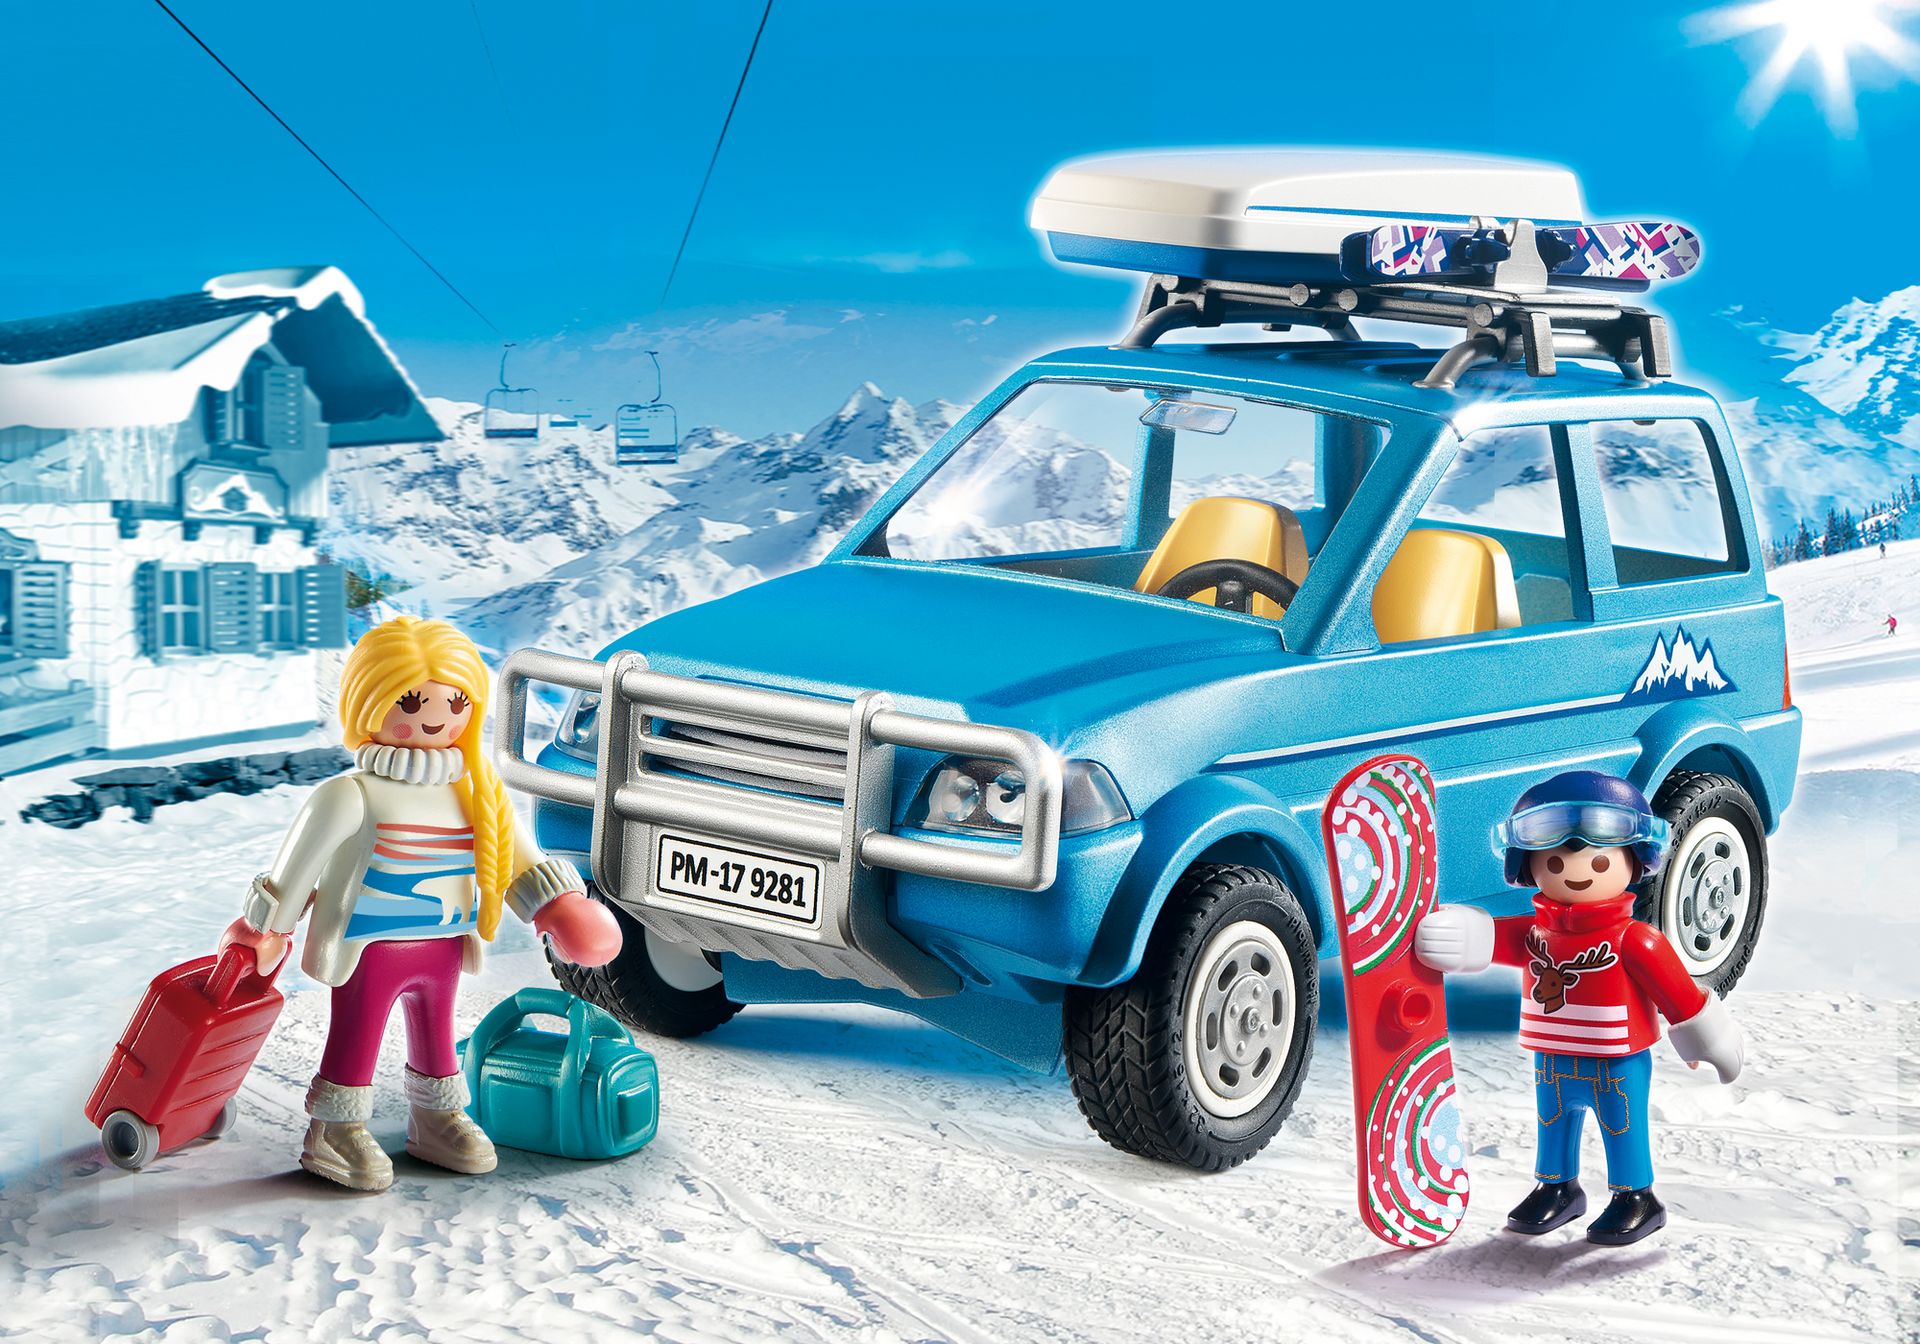 Playmobil 9286 woman practicing sports on snow new condition 